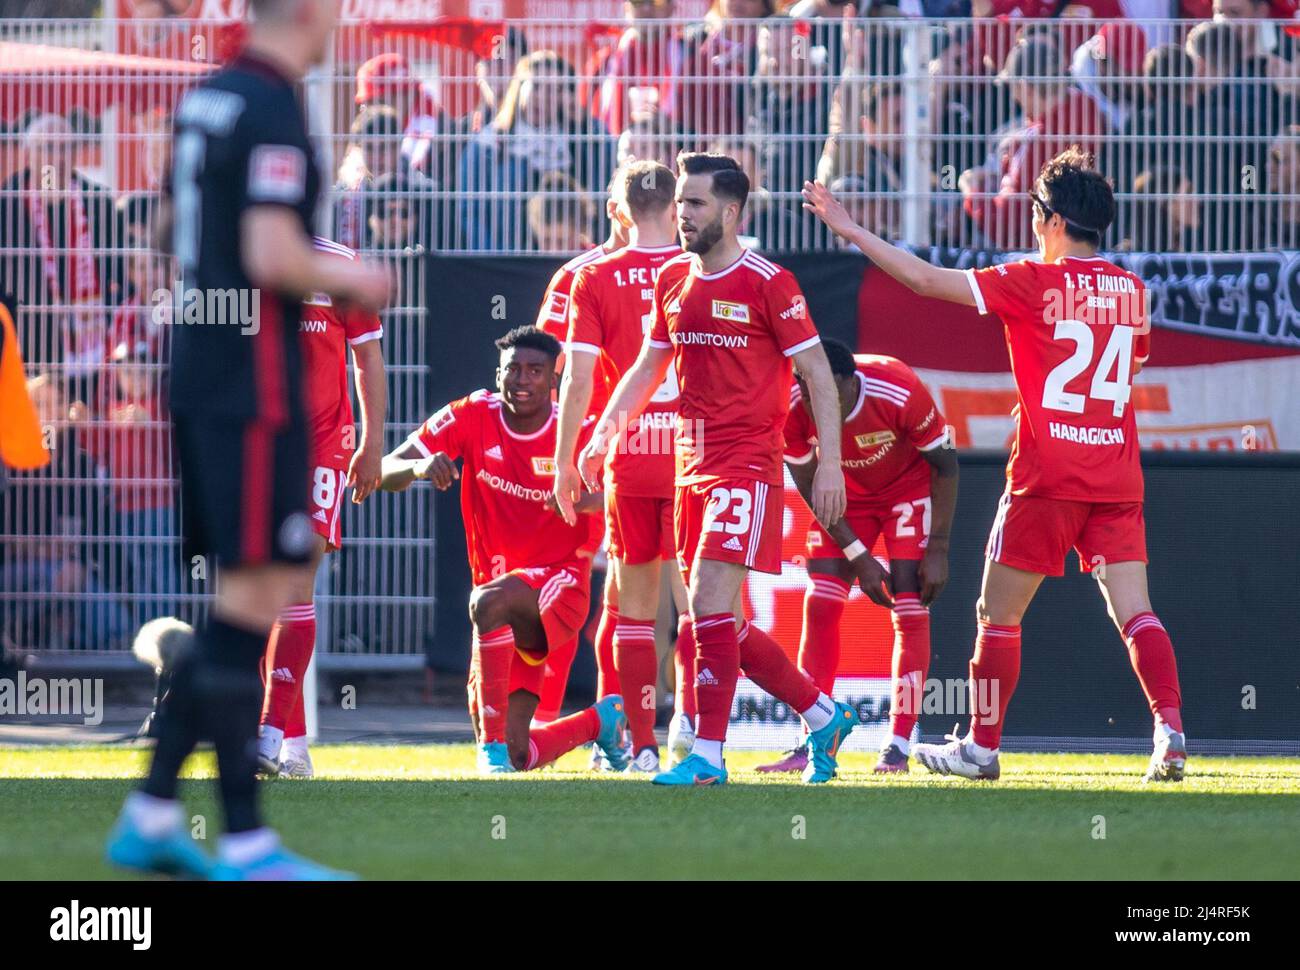 Berlin, Germany. 17th Apr, 2022. Soccer: Bundesliga, 1. FC Union Berlin - Eintracht Frankfurt, Matchday 30, An der Alten Försterei. Berlin's Taiwo Awoniyi (l) celebrates with teammates after scoring the 1:0 goal. Credit: Andreas Gora/dpa - IMPORTANT NOTE: In accordance with the requirements of the DFL Deutsche Fußball Liga and the DFB Deutscher Fußball-Bund, it is prohibited to use or have used photographs taken in the stadium and/or of the match in the form of sequence pictures and/or video-like photo series./dpa/Alamy Live News Stock Photo